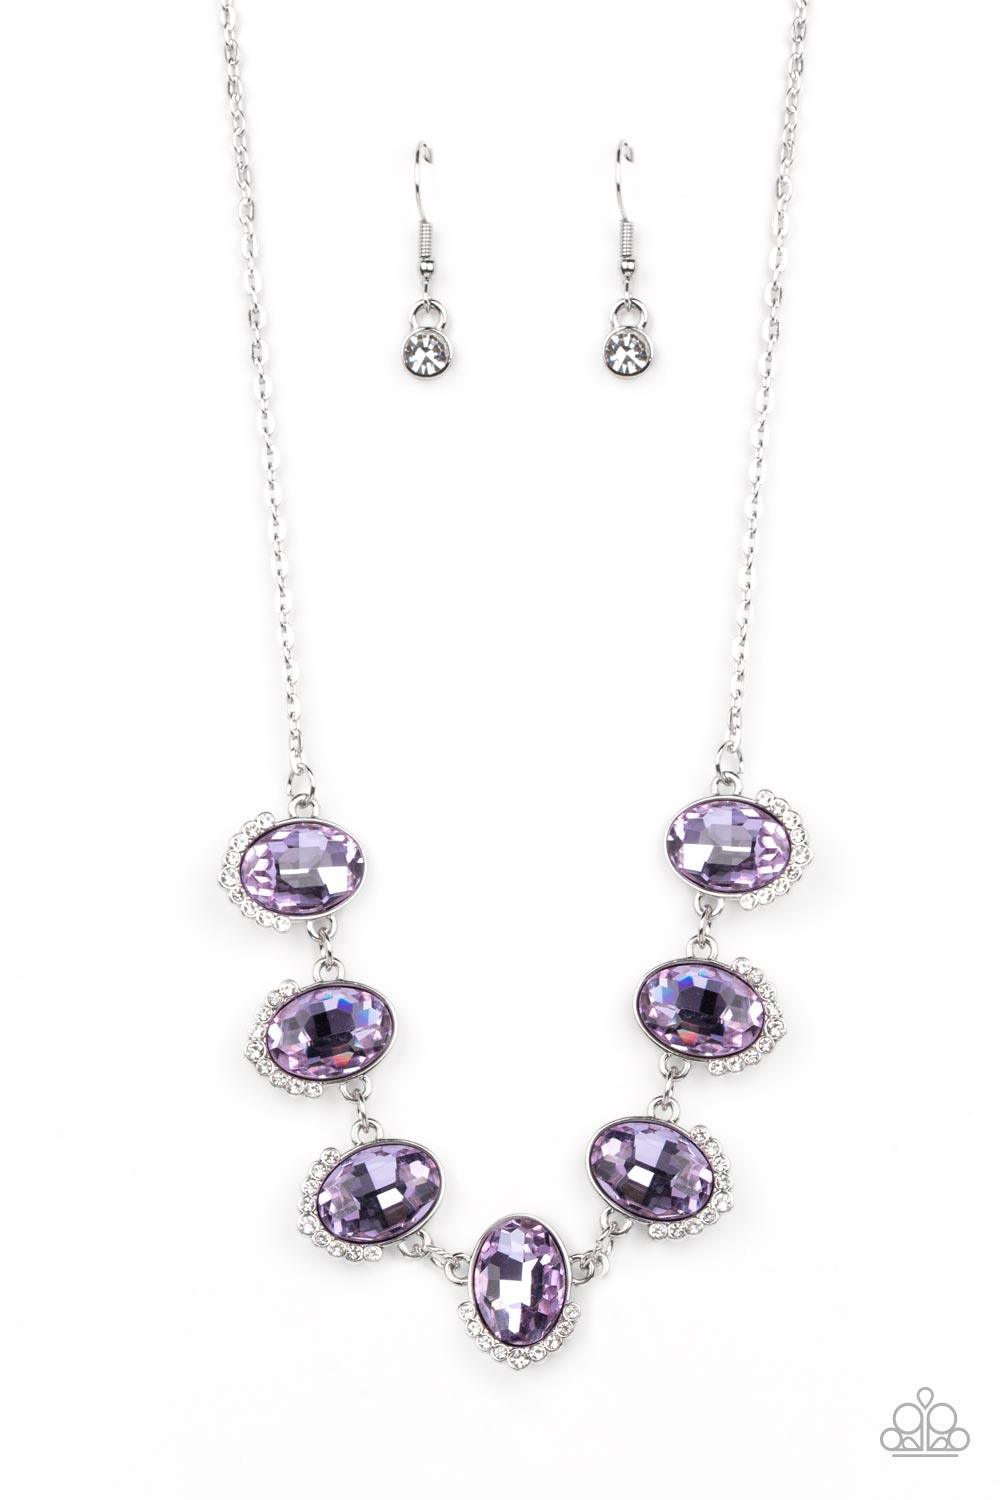 Fashion Crystal Rhinestone Jewelry Sets - Necklace and Earring Sets for  Women and Girls - Walmart.com